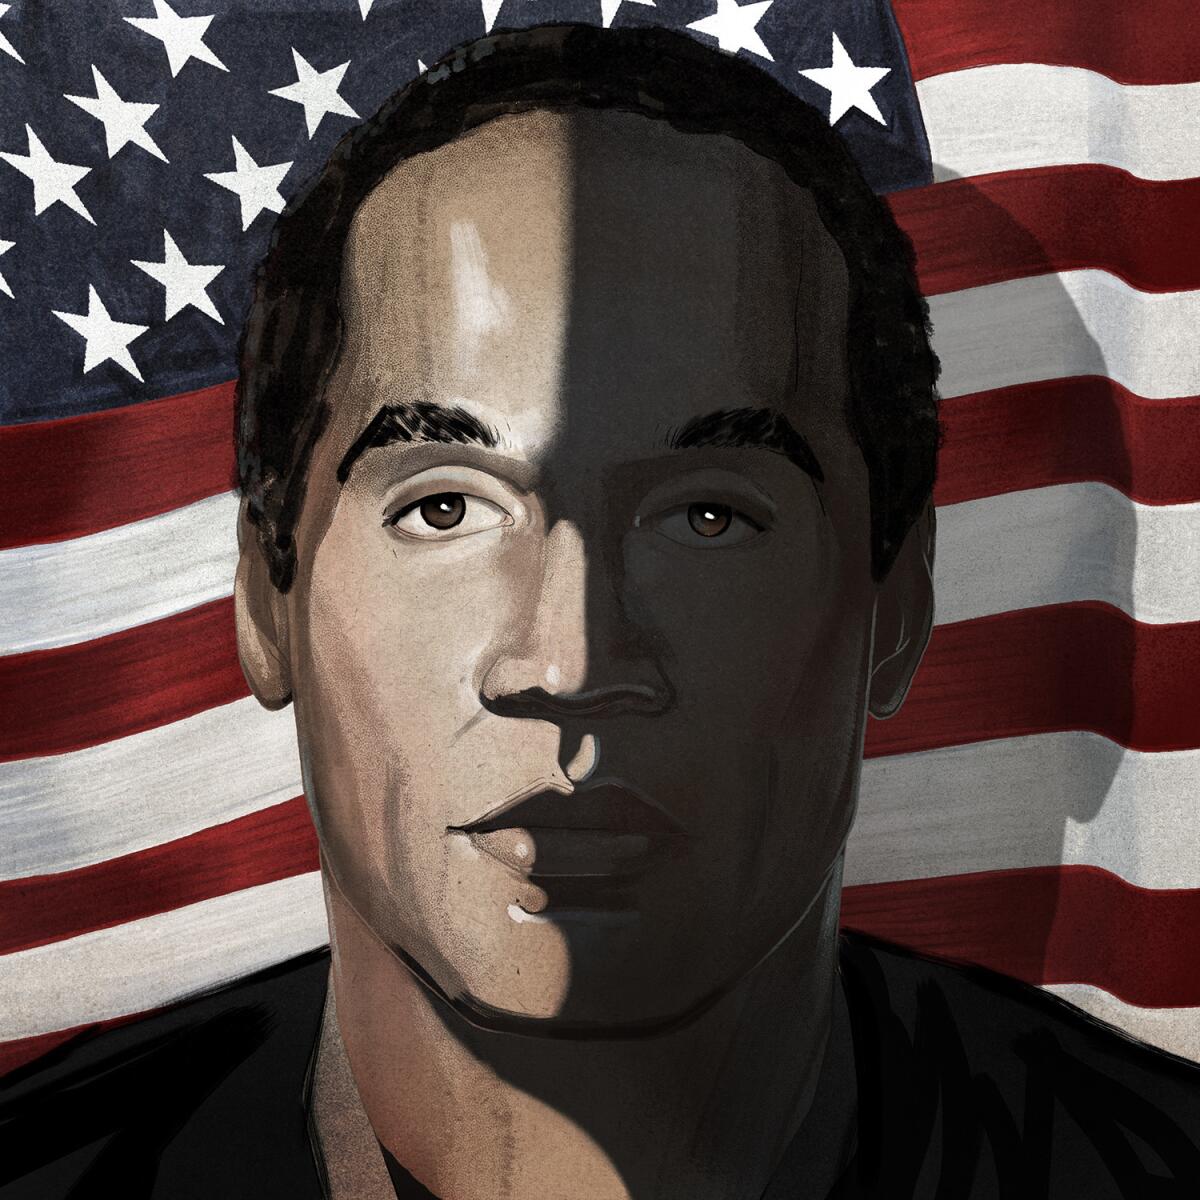 "O.J.: Made in America" blurs the line between movies and TV.